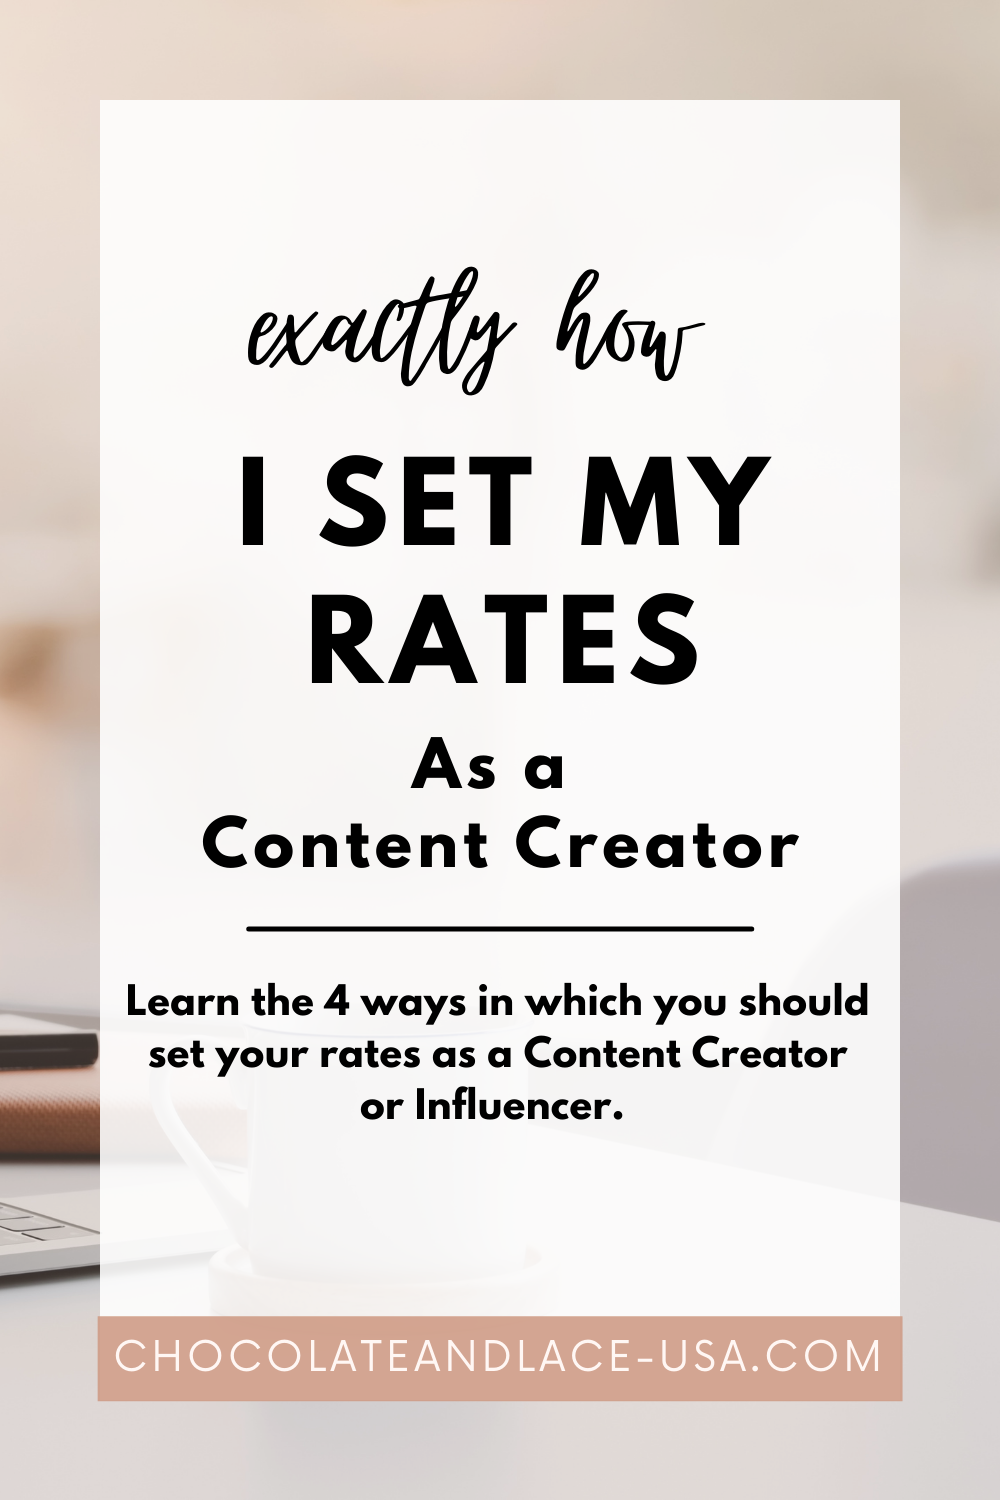 Exactly How I Set My Rates as a Content Creator